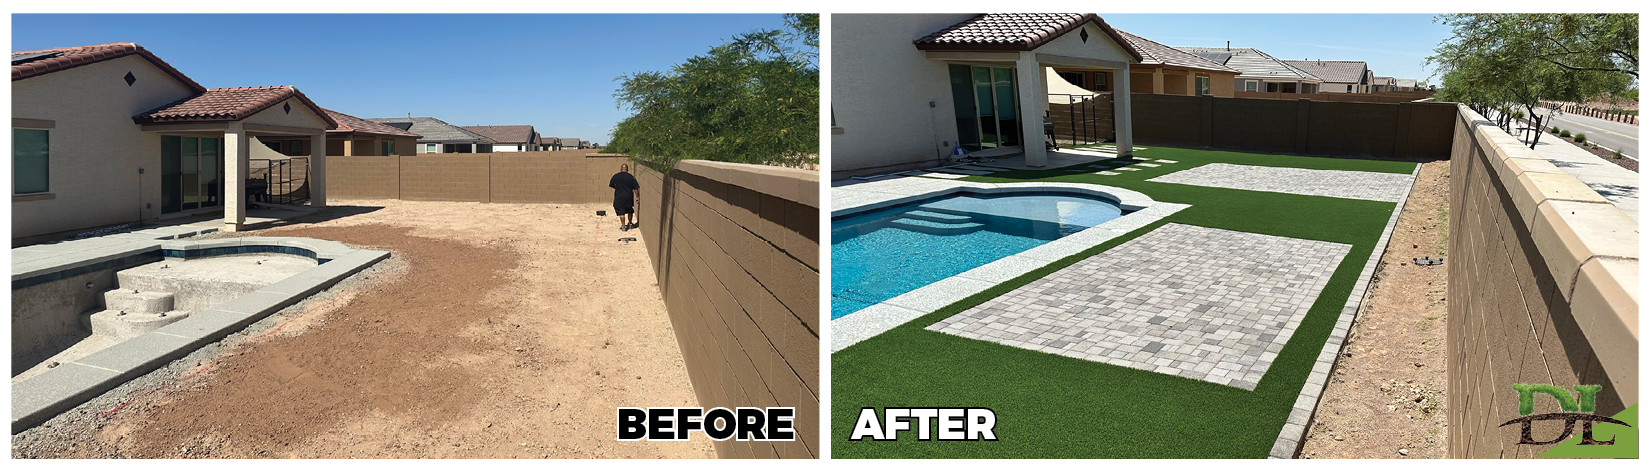 Before and After landscaping